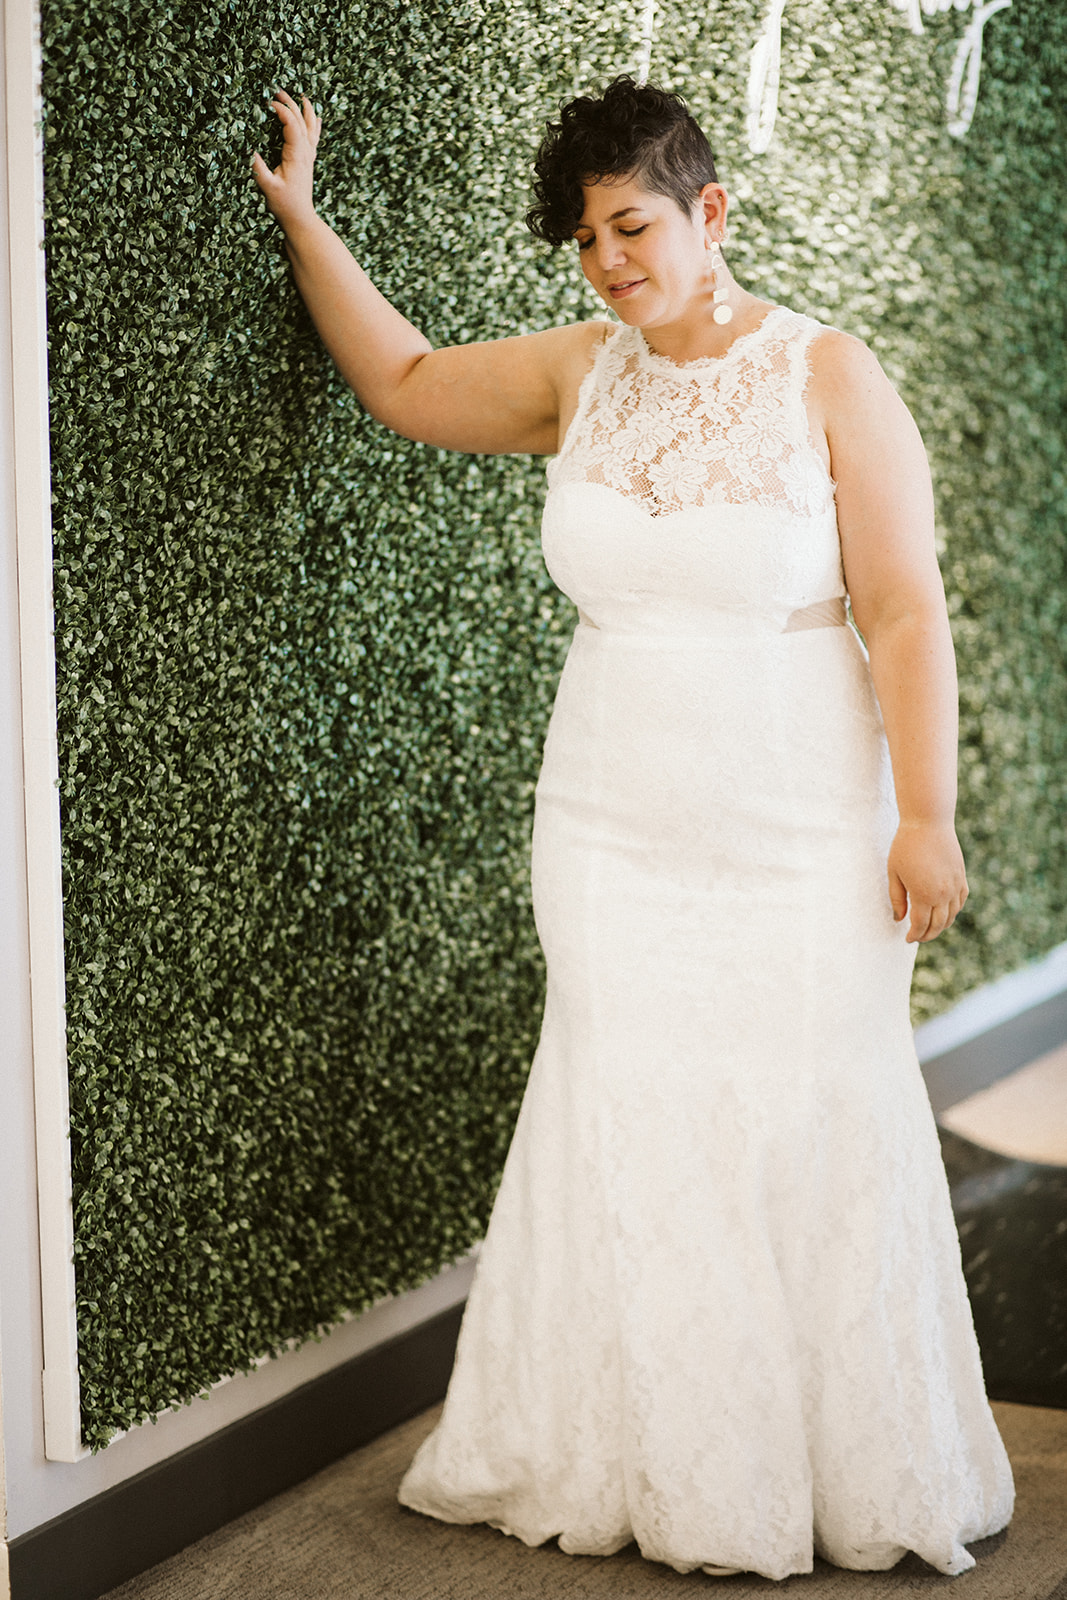 A curvy brunette woman with short hair stands in front of a greenery wall in a sleeveless lace wedding gown with an illusion neckline and cutouts at the side waist at David's Bridal